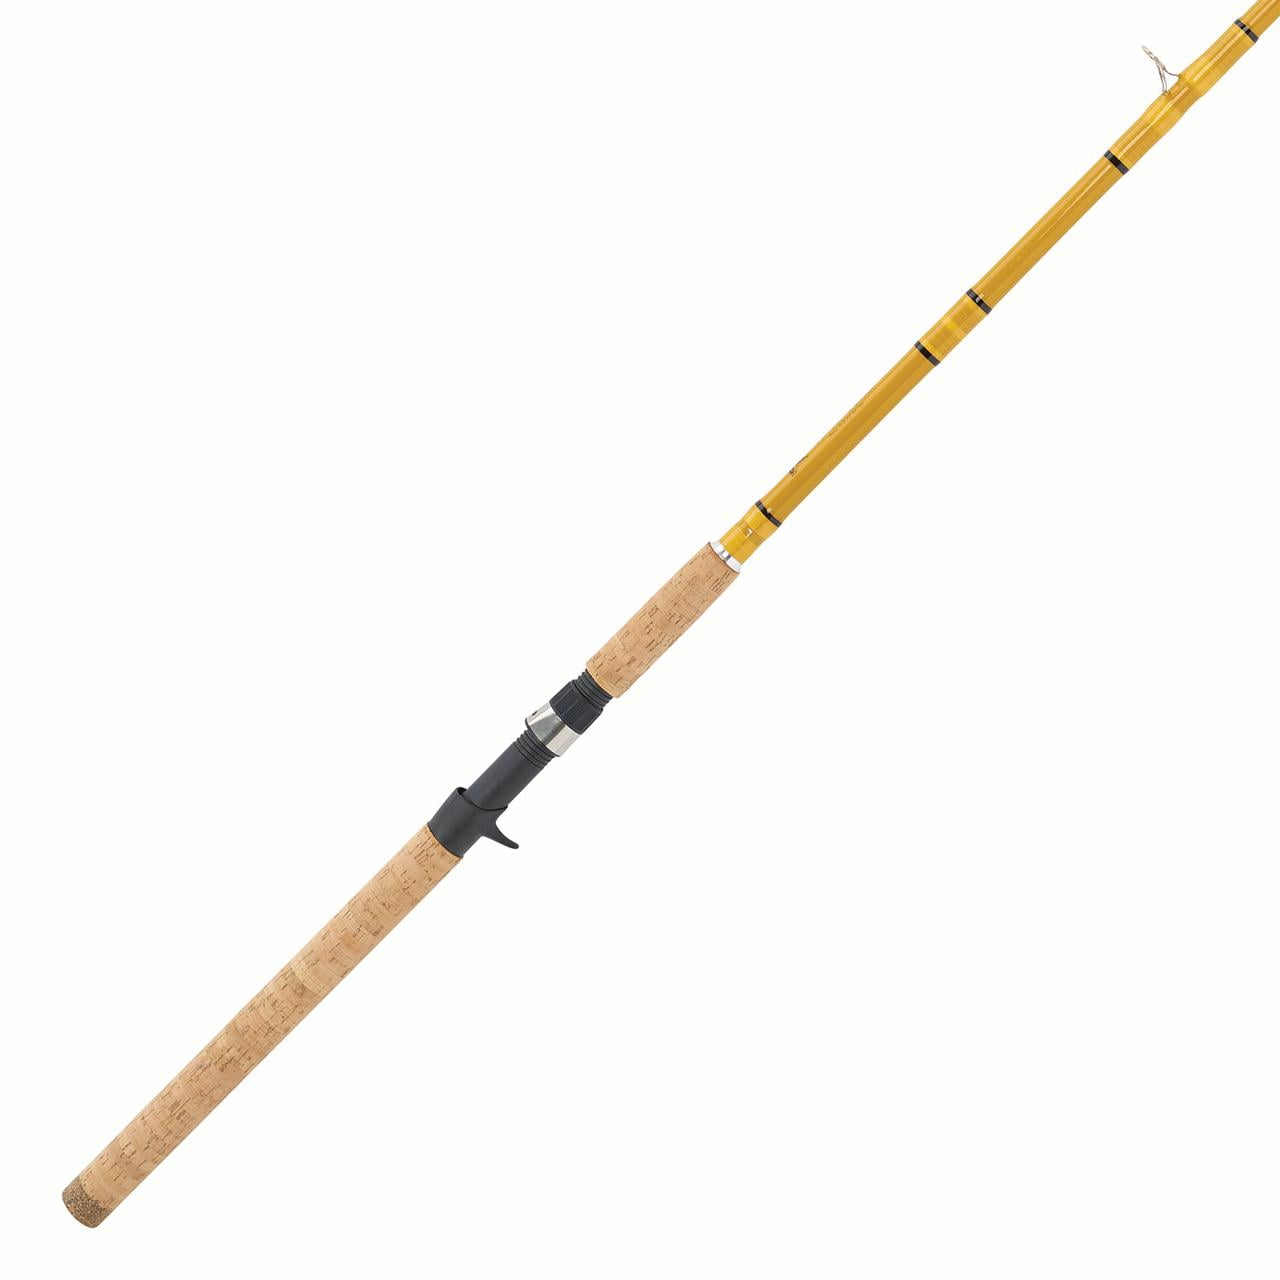 Eagle Claw Crafted Glass Spinning Rod 5'6 2 Piece Light